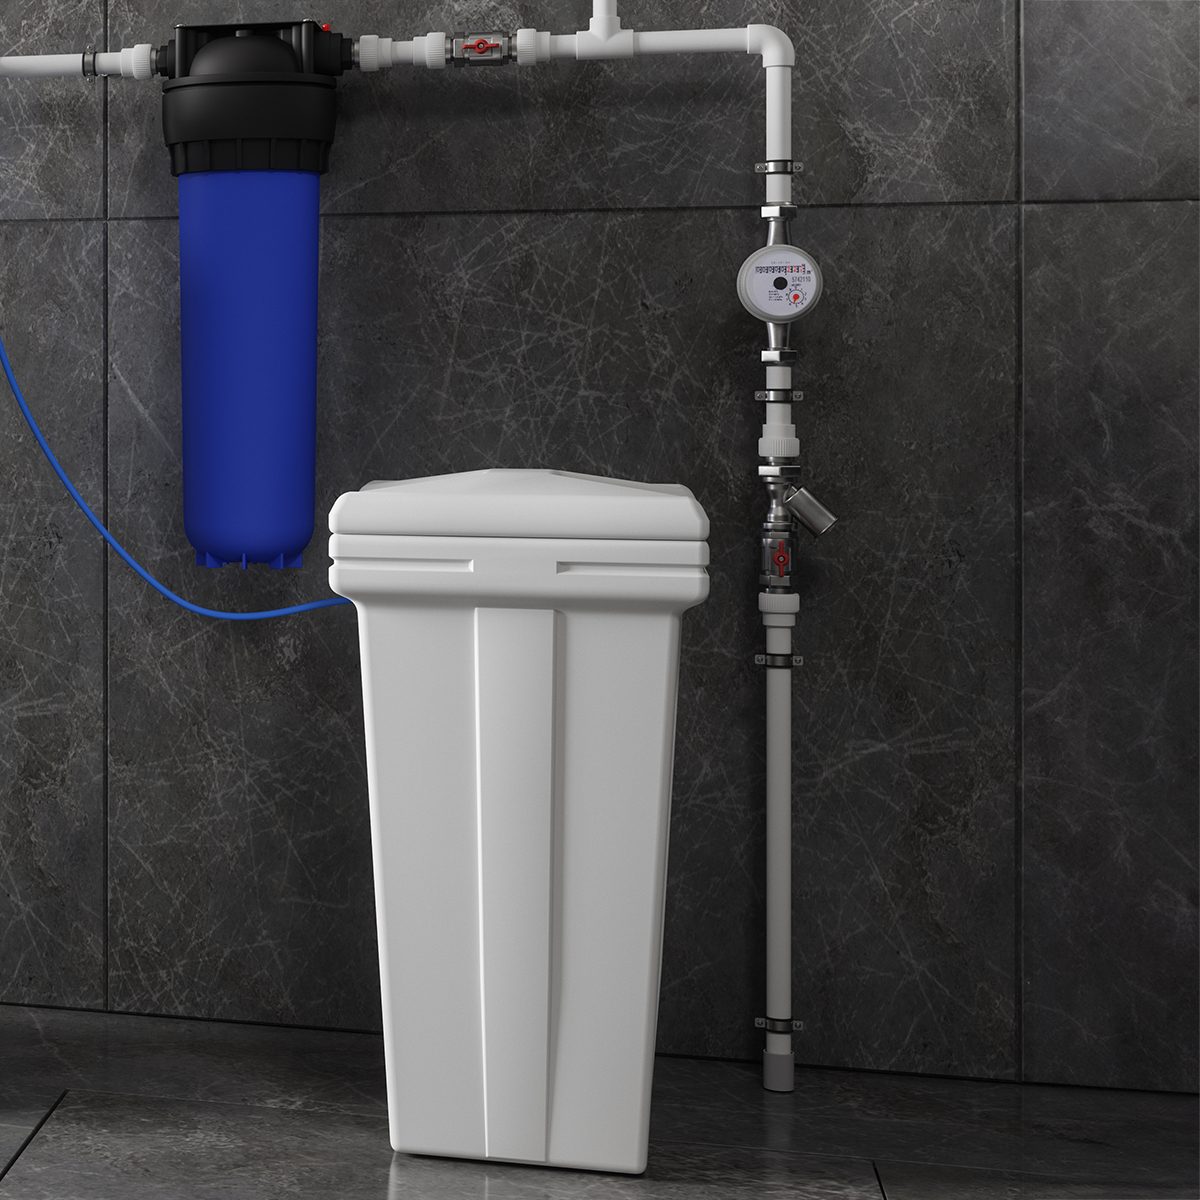 How Does a Water Softener Work? All Your Questions, Answered